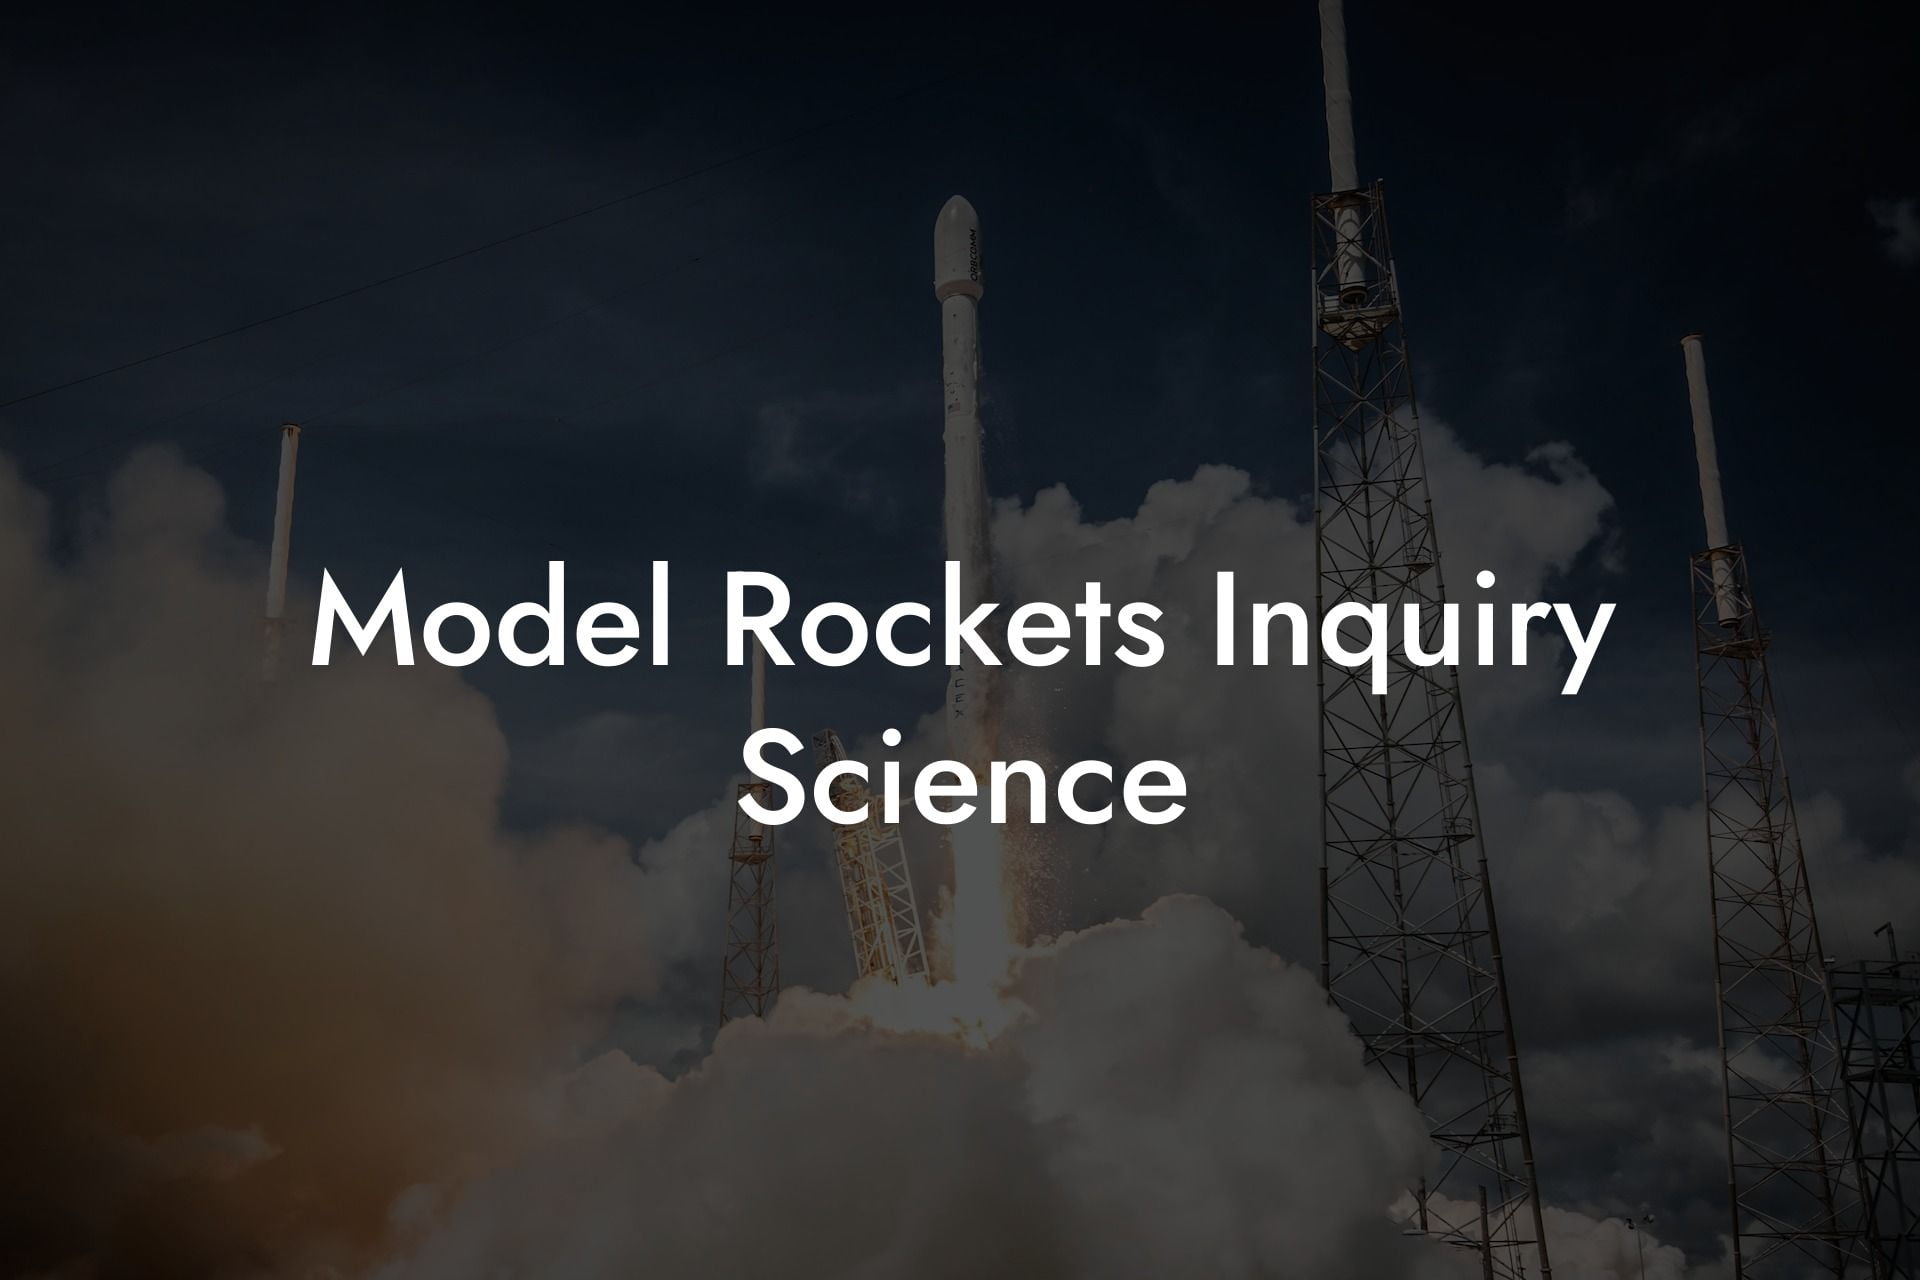 Model Rockets Inquiry Science